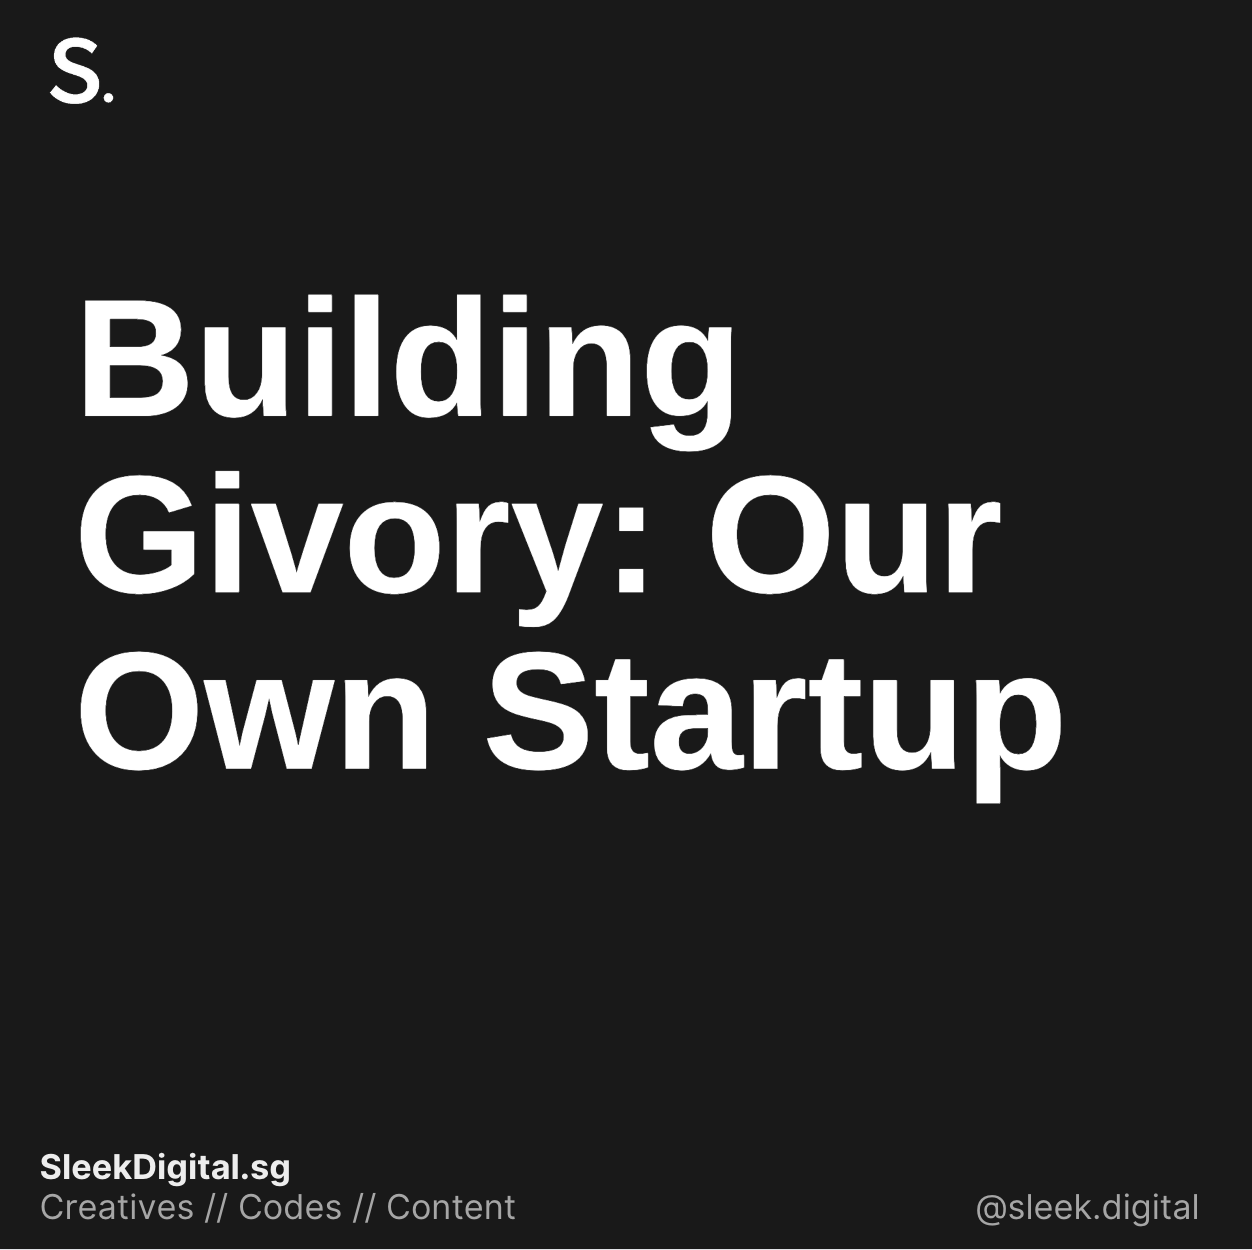 Part 1: Building Givory (our own startup)